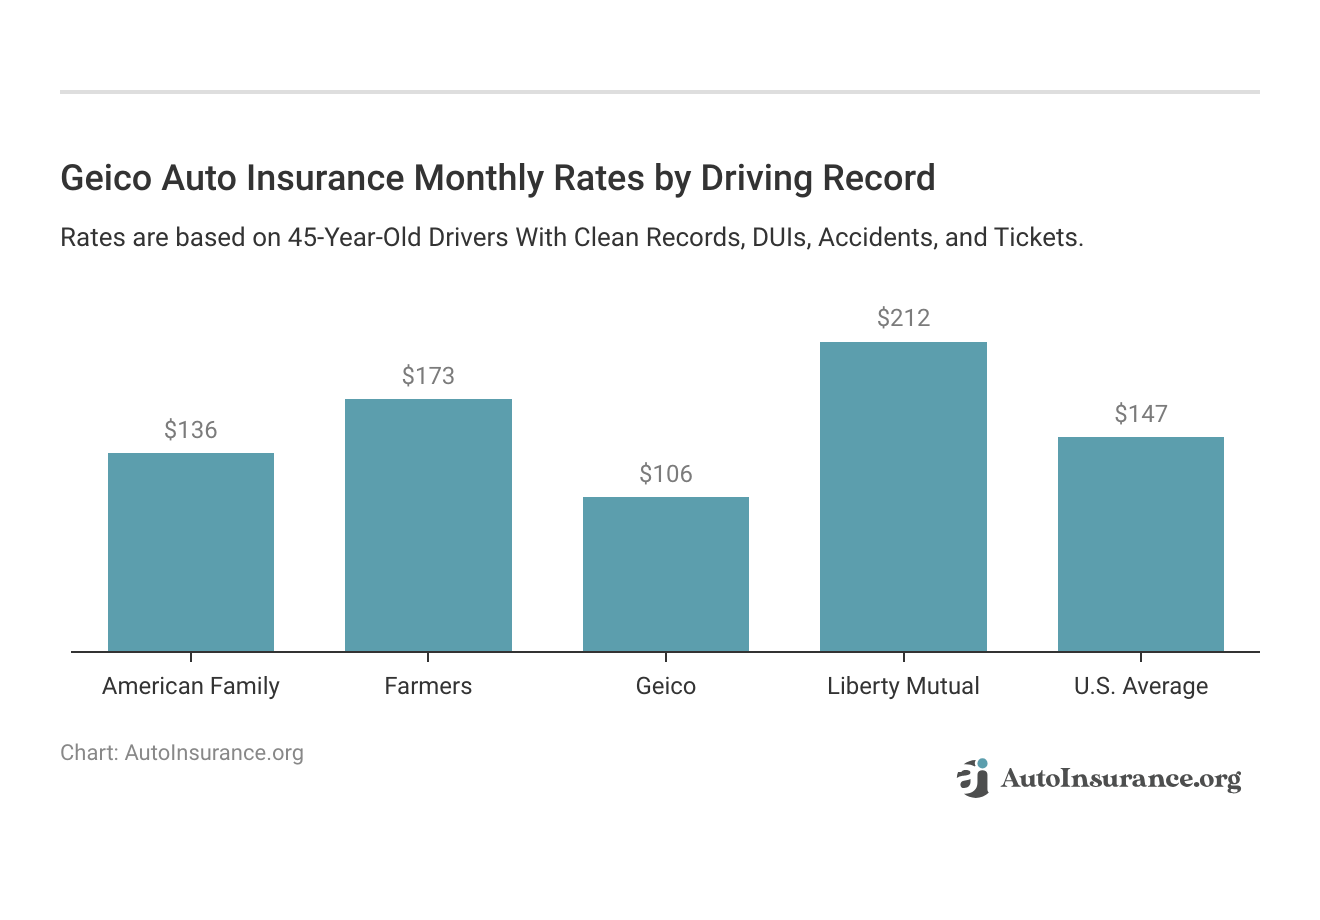 <h3>Geico Auto Insurance Monthly Rates by Driving Record</h3>